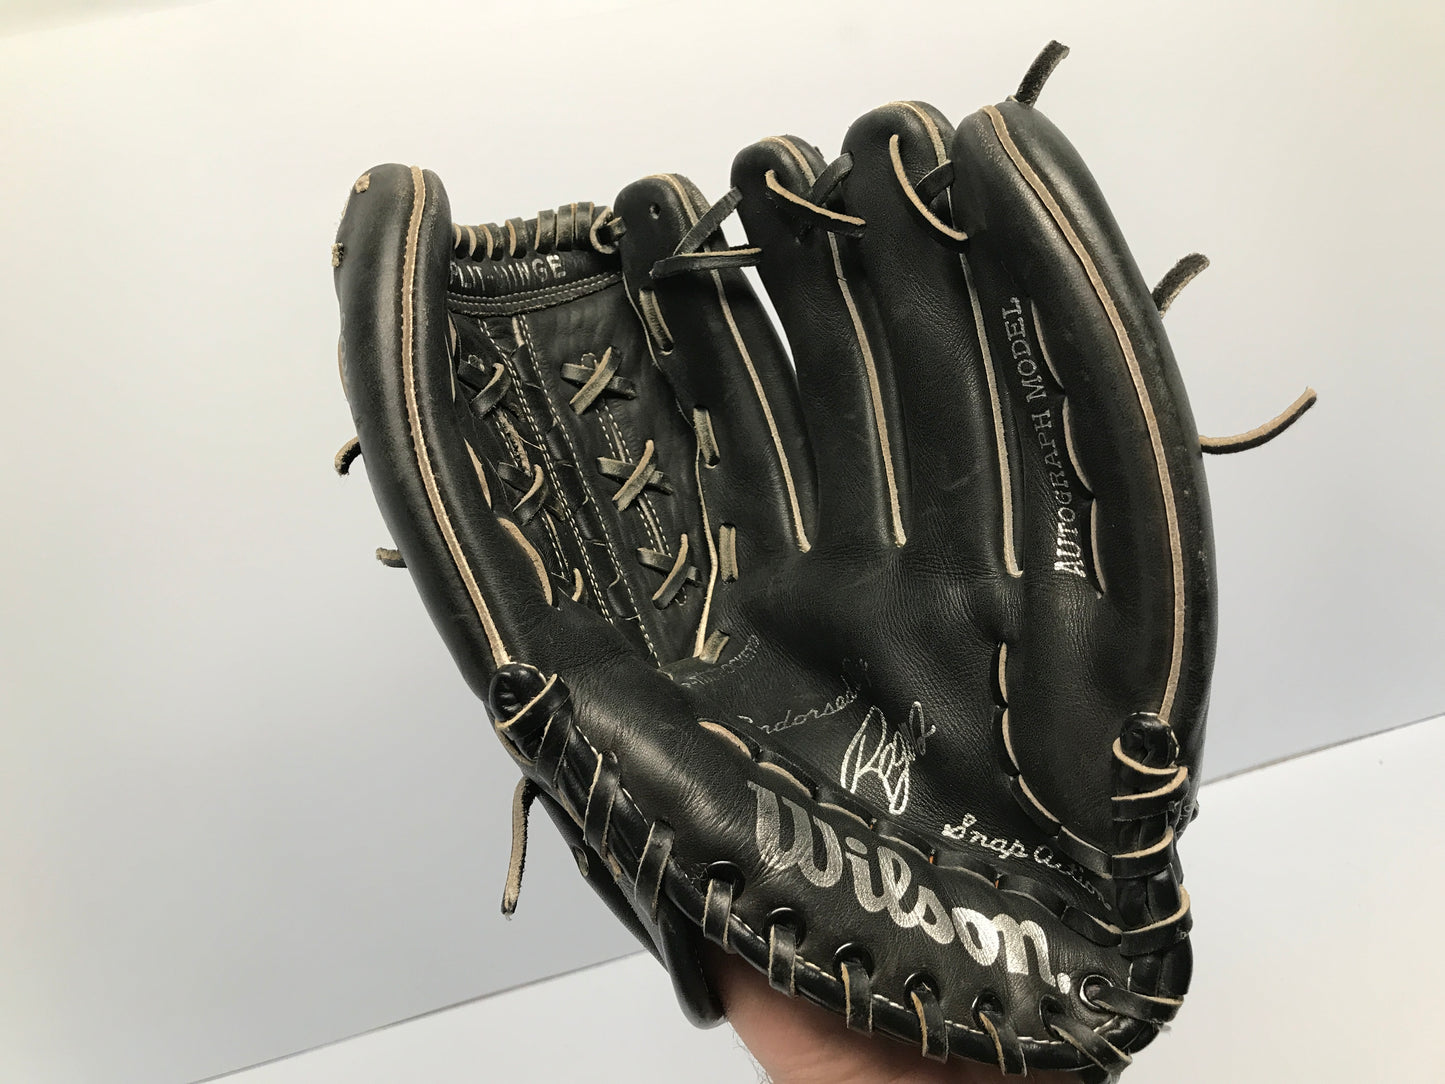 Baseball Glove Adult Size 12in Wilson Black Leather Fits On Left Hand